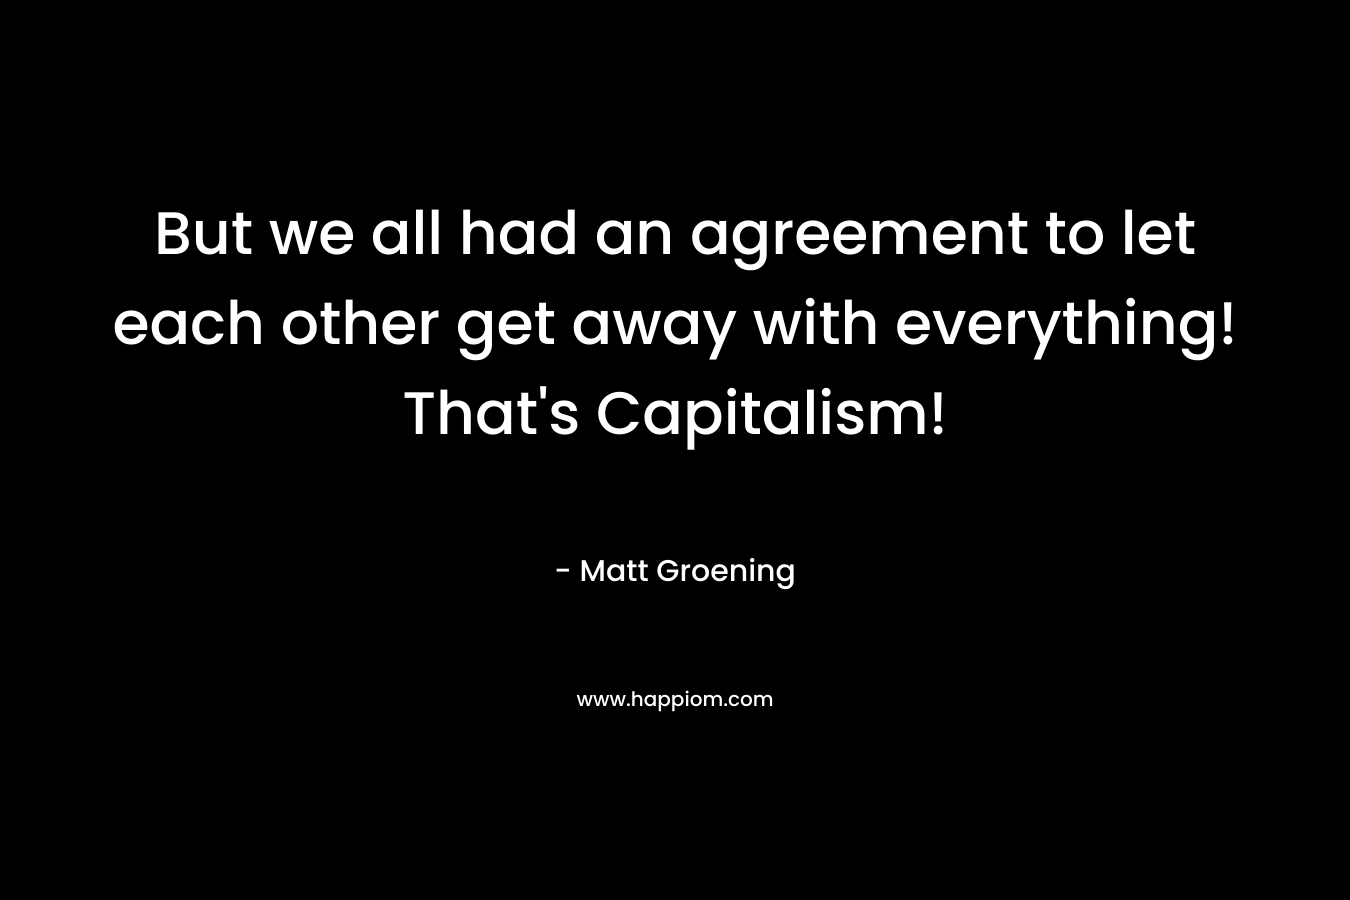 But we all had an agreement to let each other get away with everything! That’s Capitalism! – Matt Groening